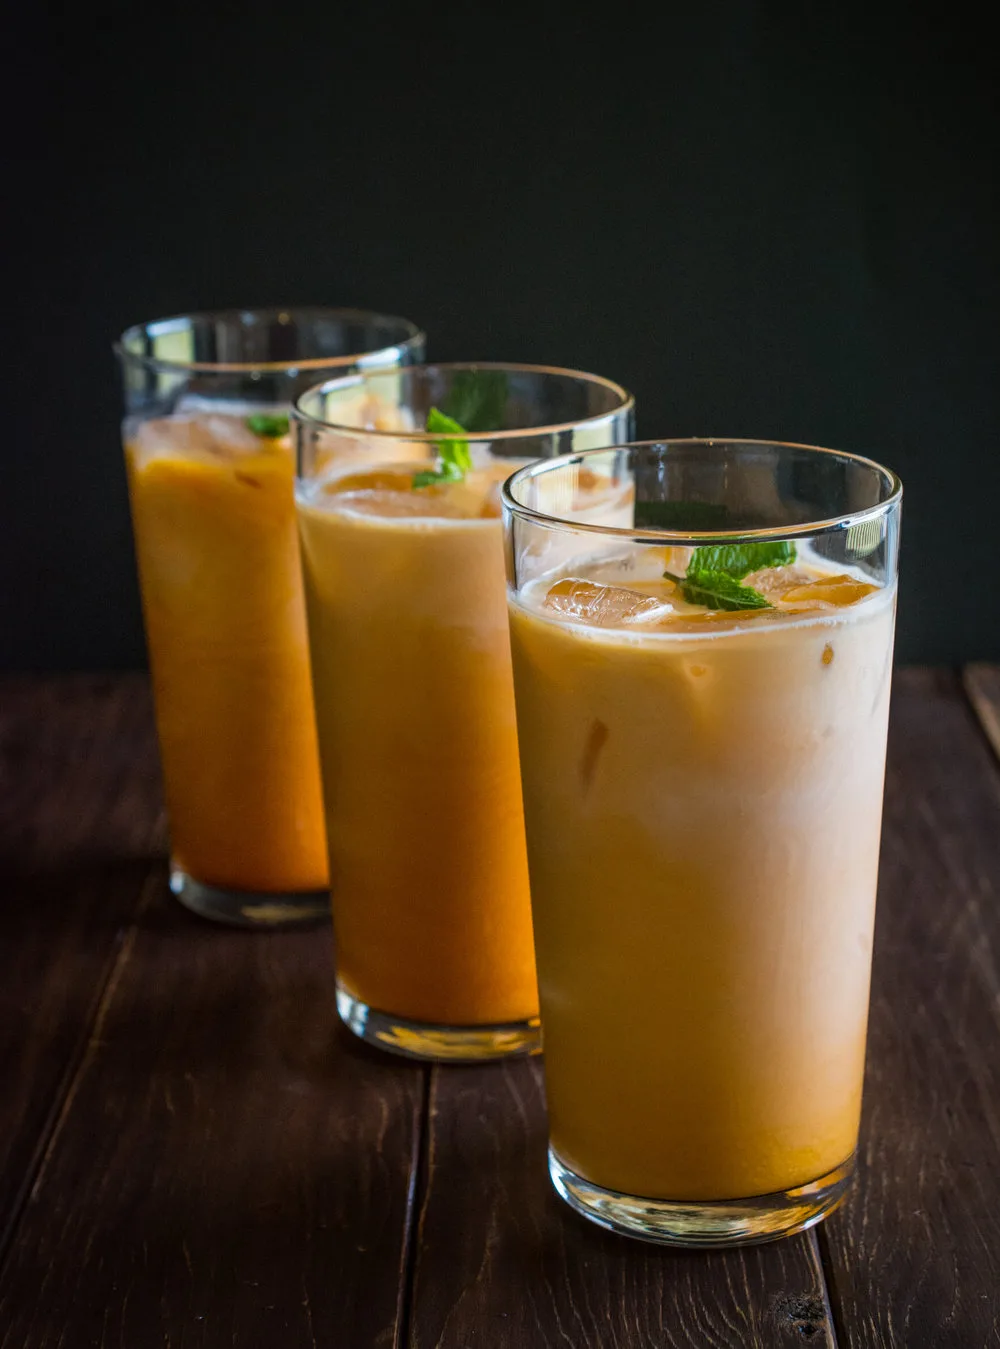 Thai Iced Tea is the perfect refreshing drink for a hot summer day (or anytime)! Sweet, creamy and full of flavor. Pairs exceptionally well with spicy Thai food. 